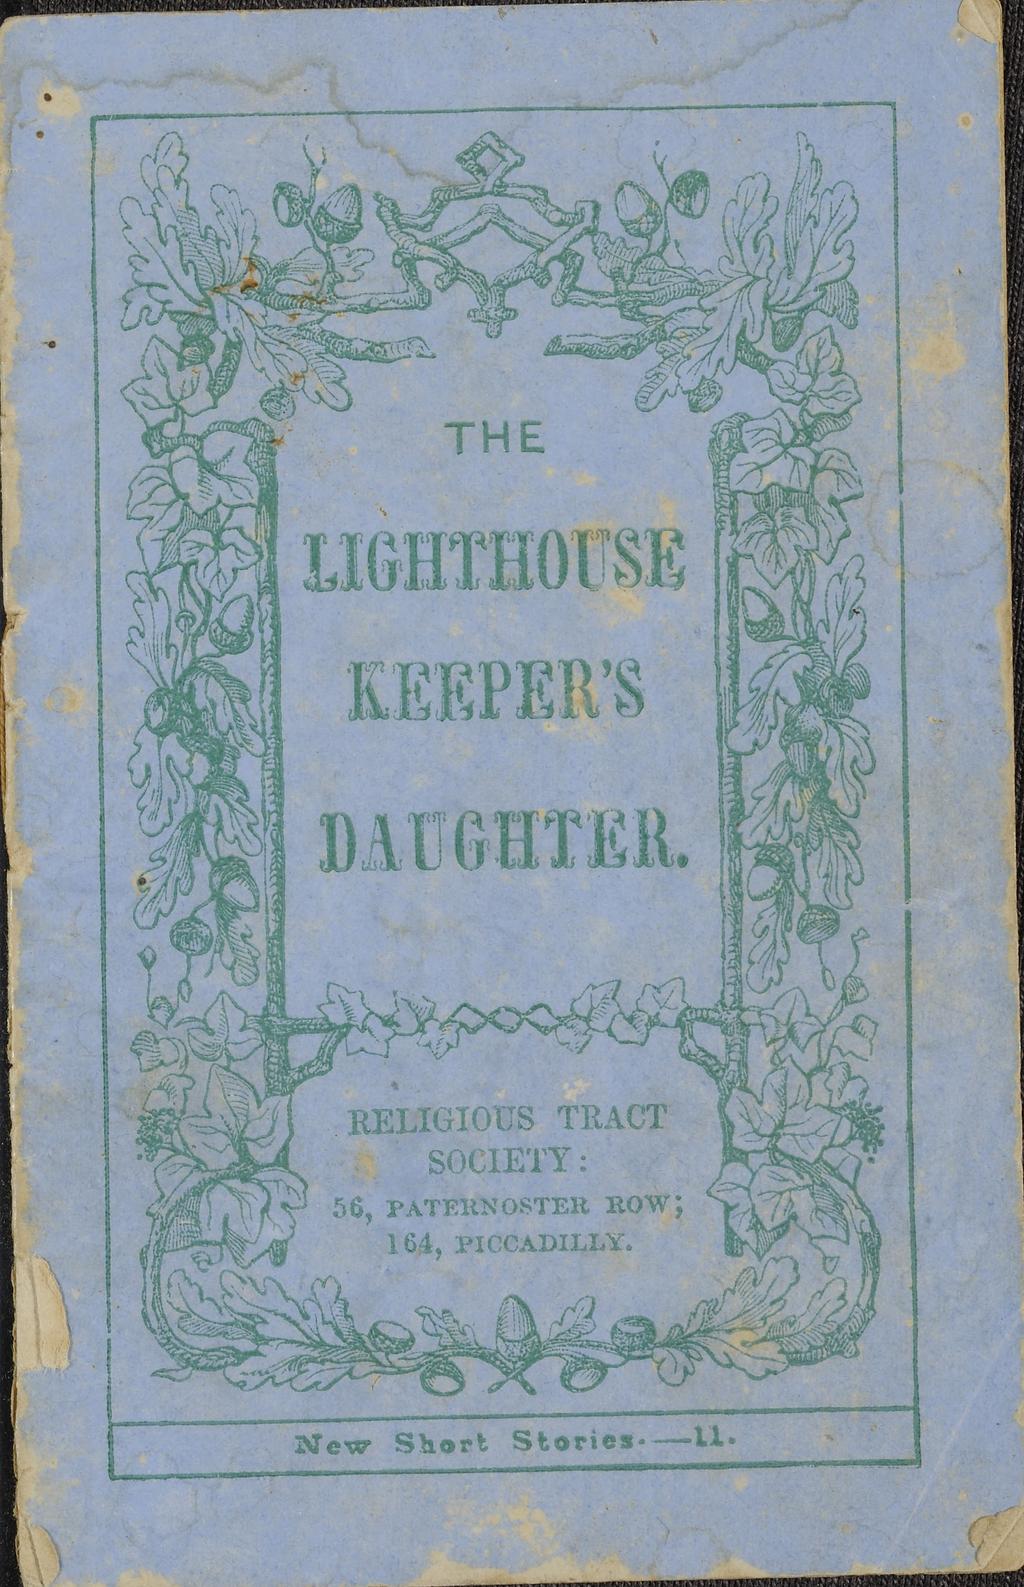 THE LIGHTHOUSE KEEPER'S DAUGHTER.